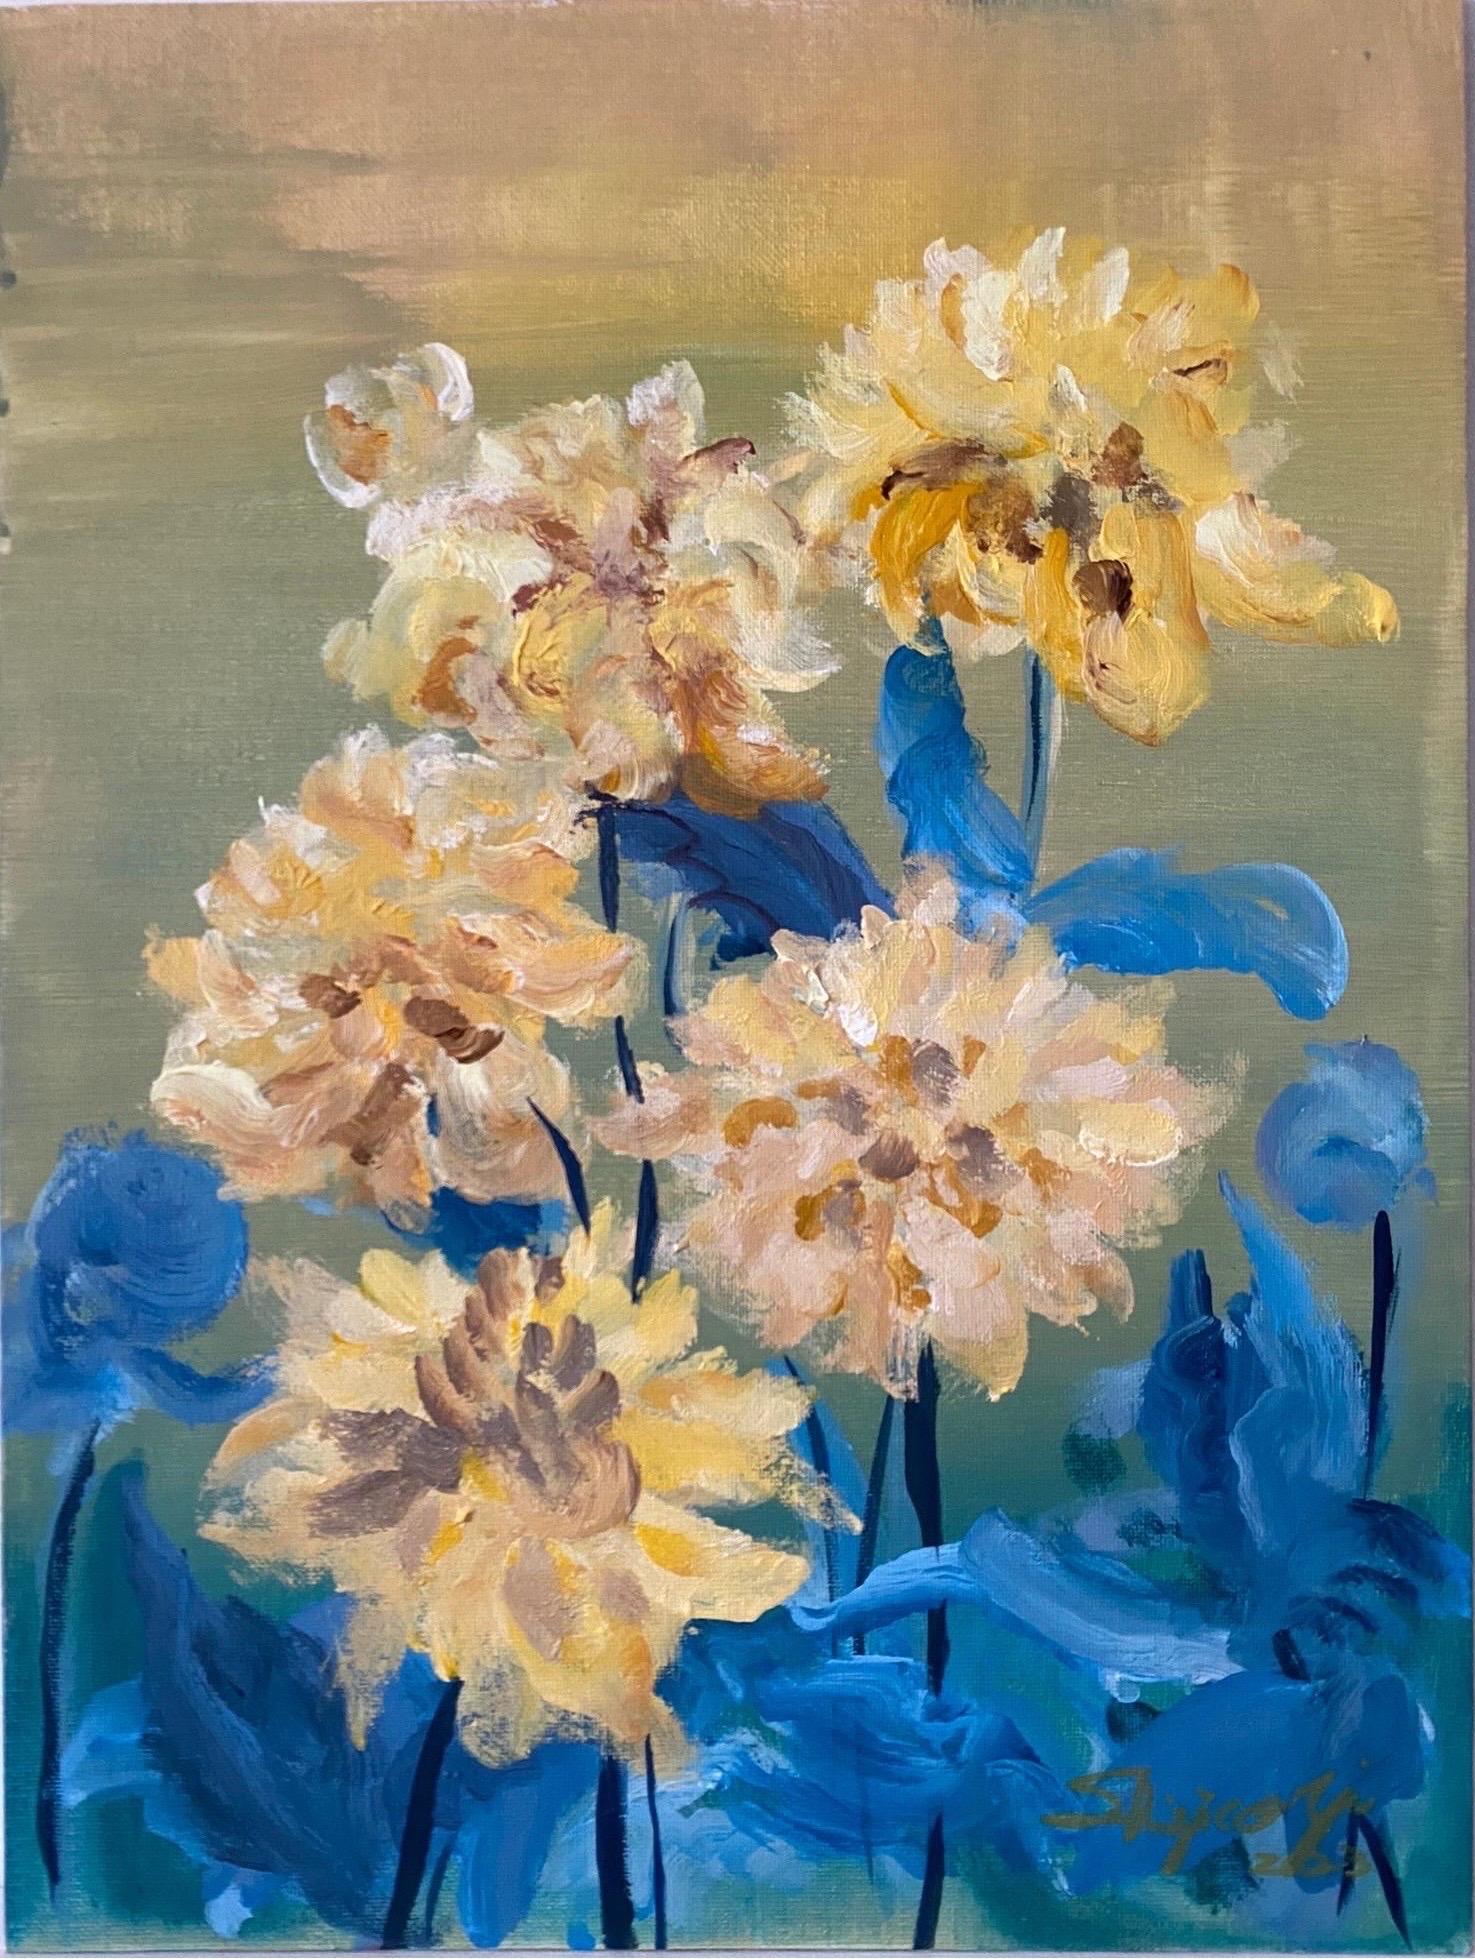 Original-Yellow Dahlias in Blue-Abstract-Expression-British school- UK Artist - Abstract Expressionist Painting by Shizico Yi